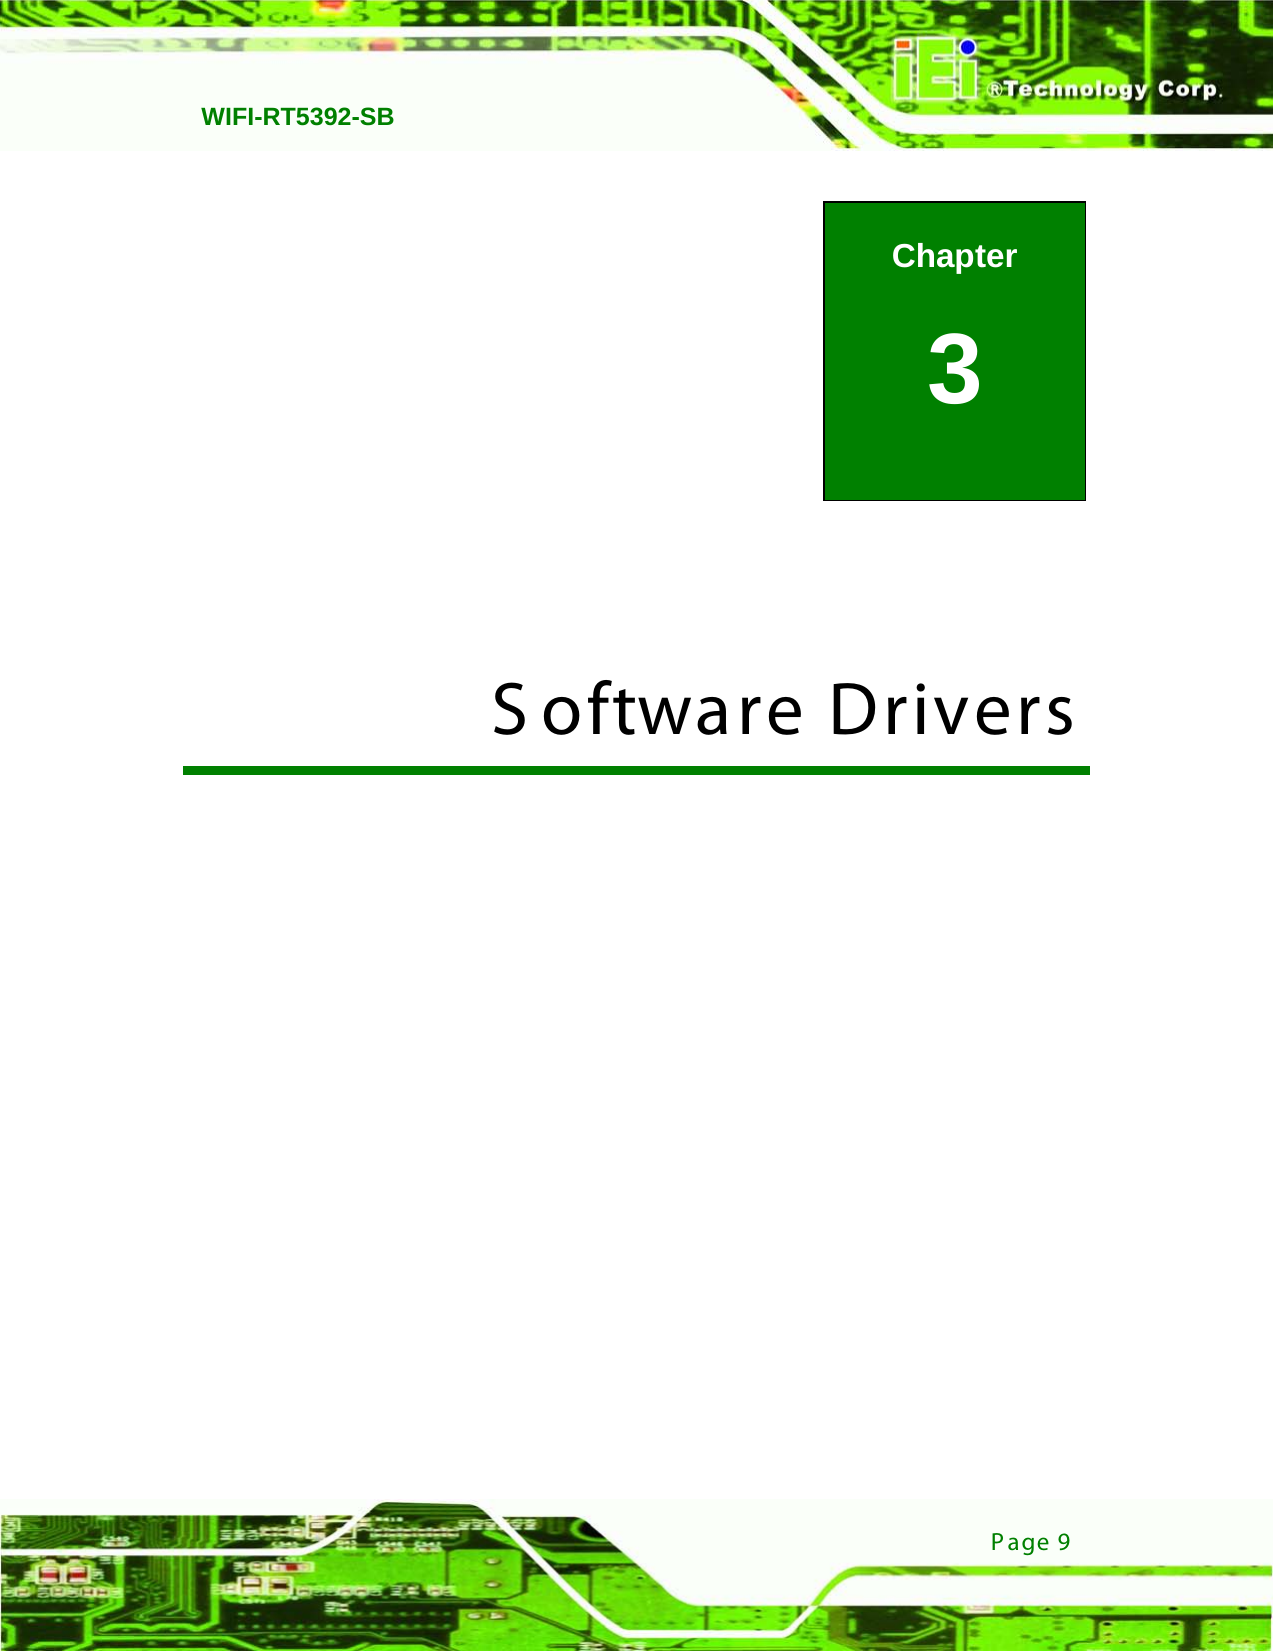   WIFI-RT5392-SB Page 9             3 Software Drivers Chapter 3 